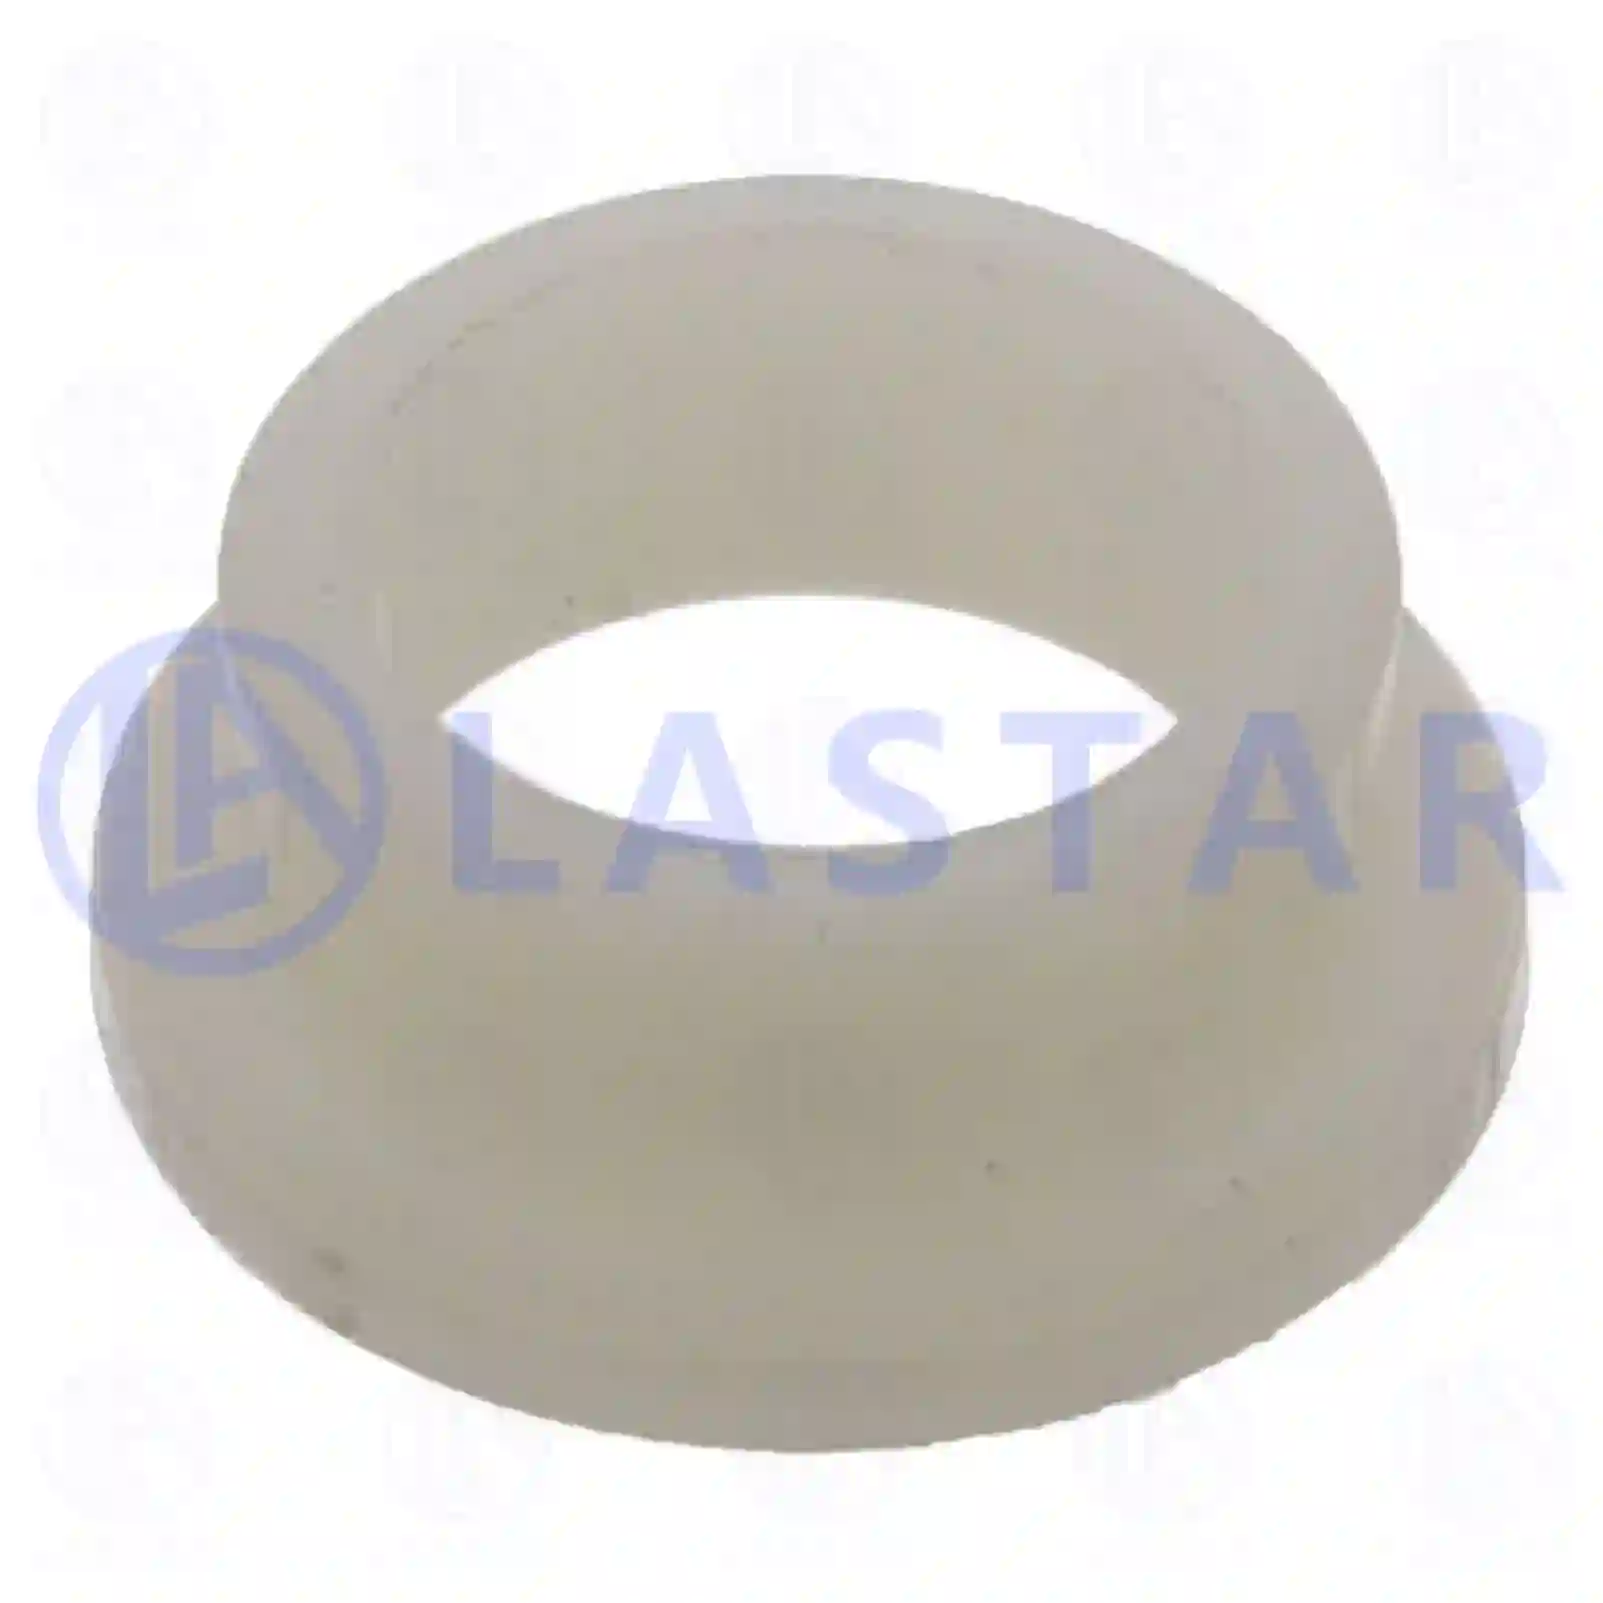 Bushing, stabilizer, 77728157, 9413230350, , , , ||  77728157 Lastar Spare Part | Truck Spare Parts, Auotomotive Spare Parts Bushing, stabilizer, 77728157, 9413230350, , , , ||  77728157 Lastar Spare Part | Truck Spare Parts, Auotomotive Spare Parts